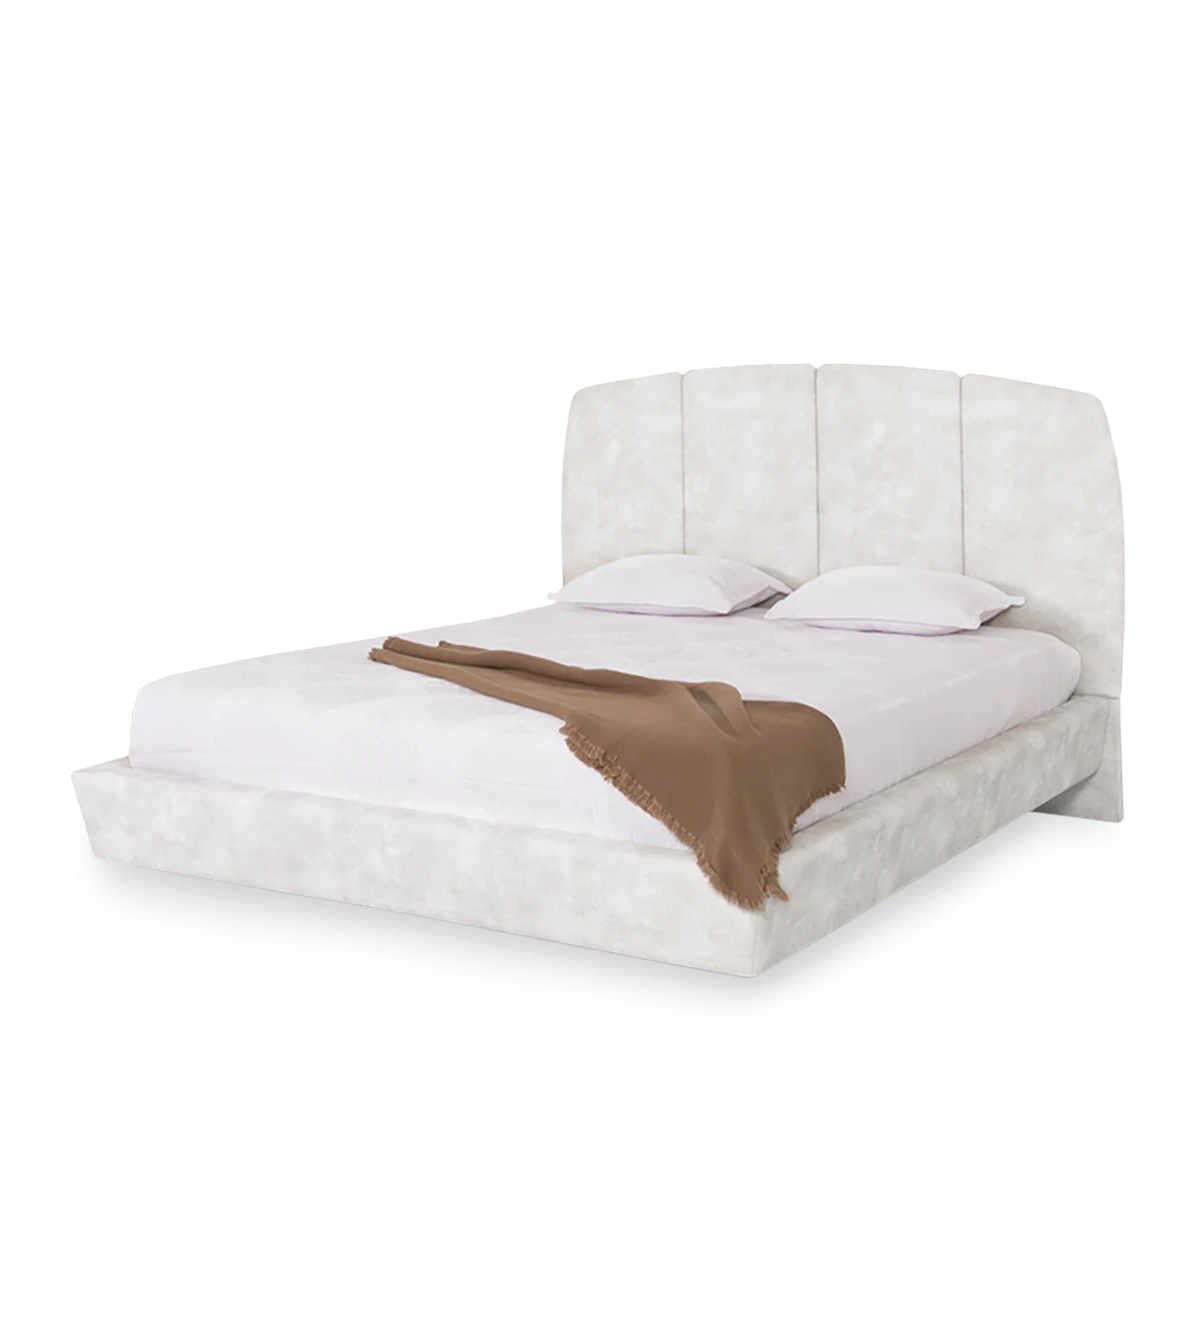 Fabric upholstered double bed with hanging backboard.